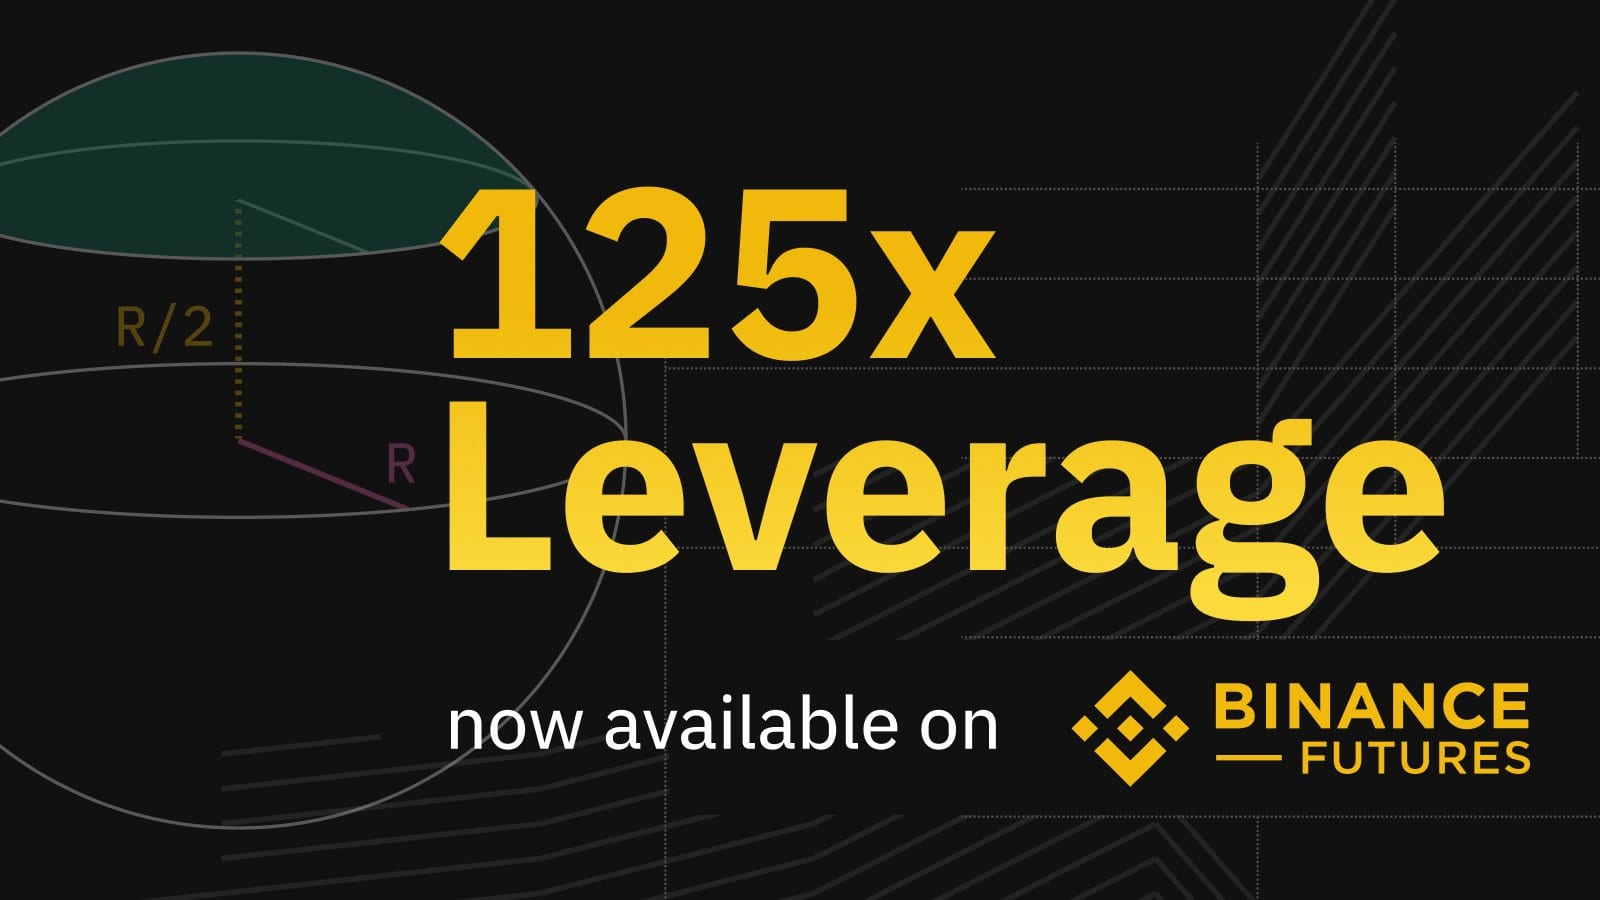 Binance increases the leverage on bitcoin futures at 125x ...